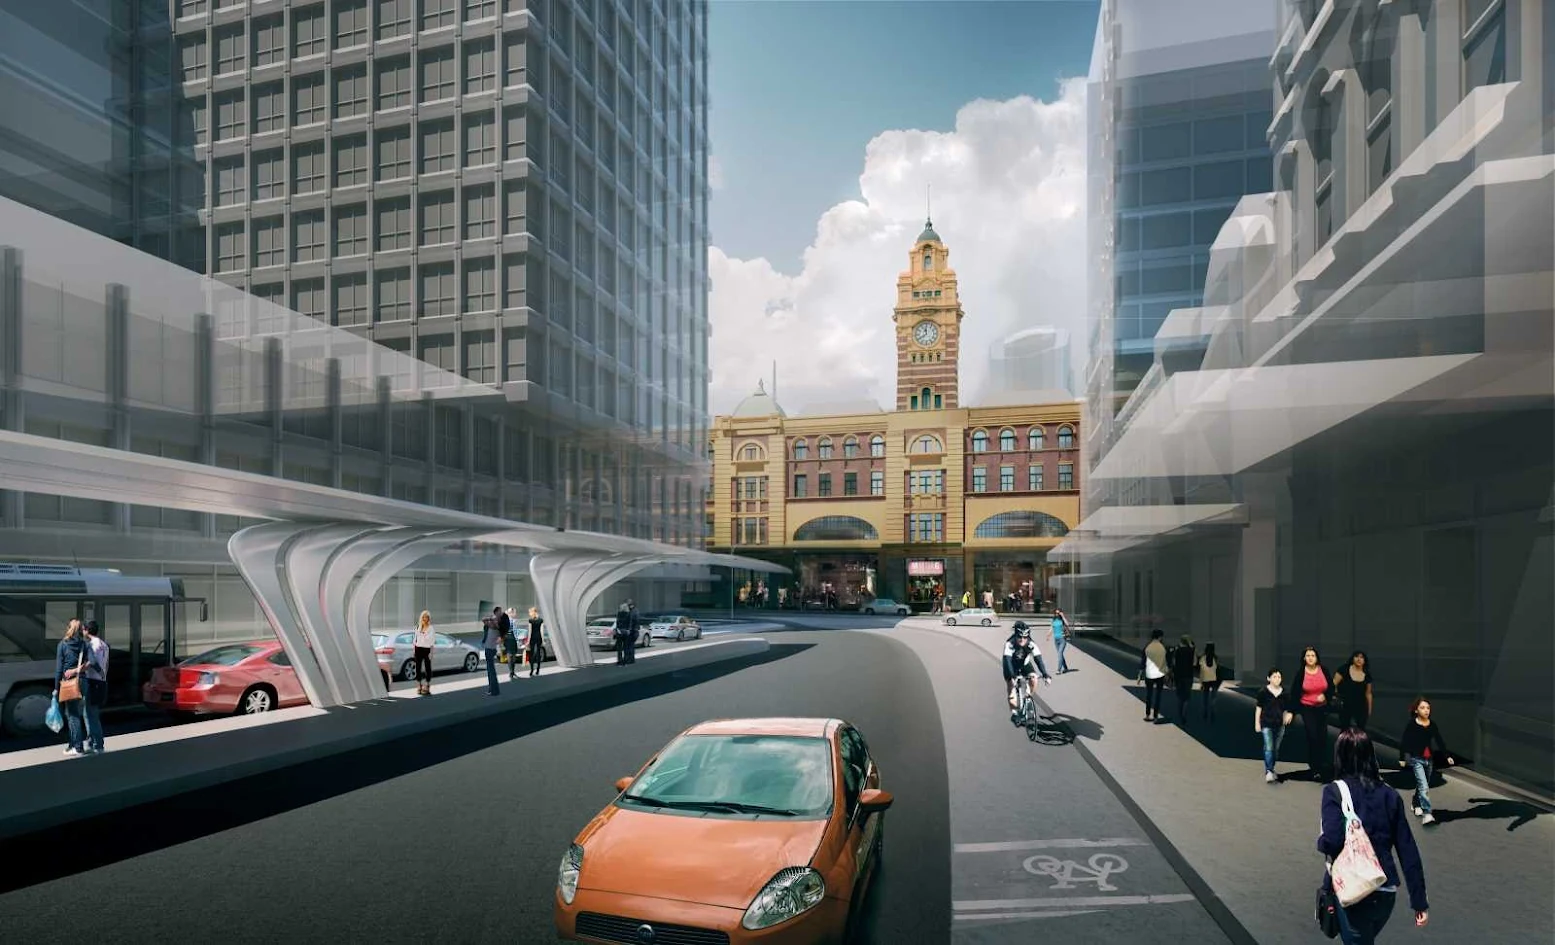 08-Flinders-Street-Station-Design-Competition-by-Zaha-Hadid+BVN-Architecture